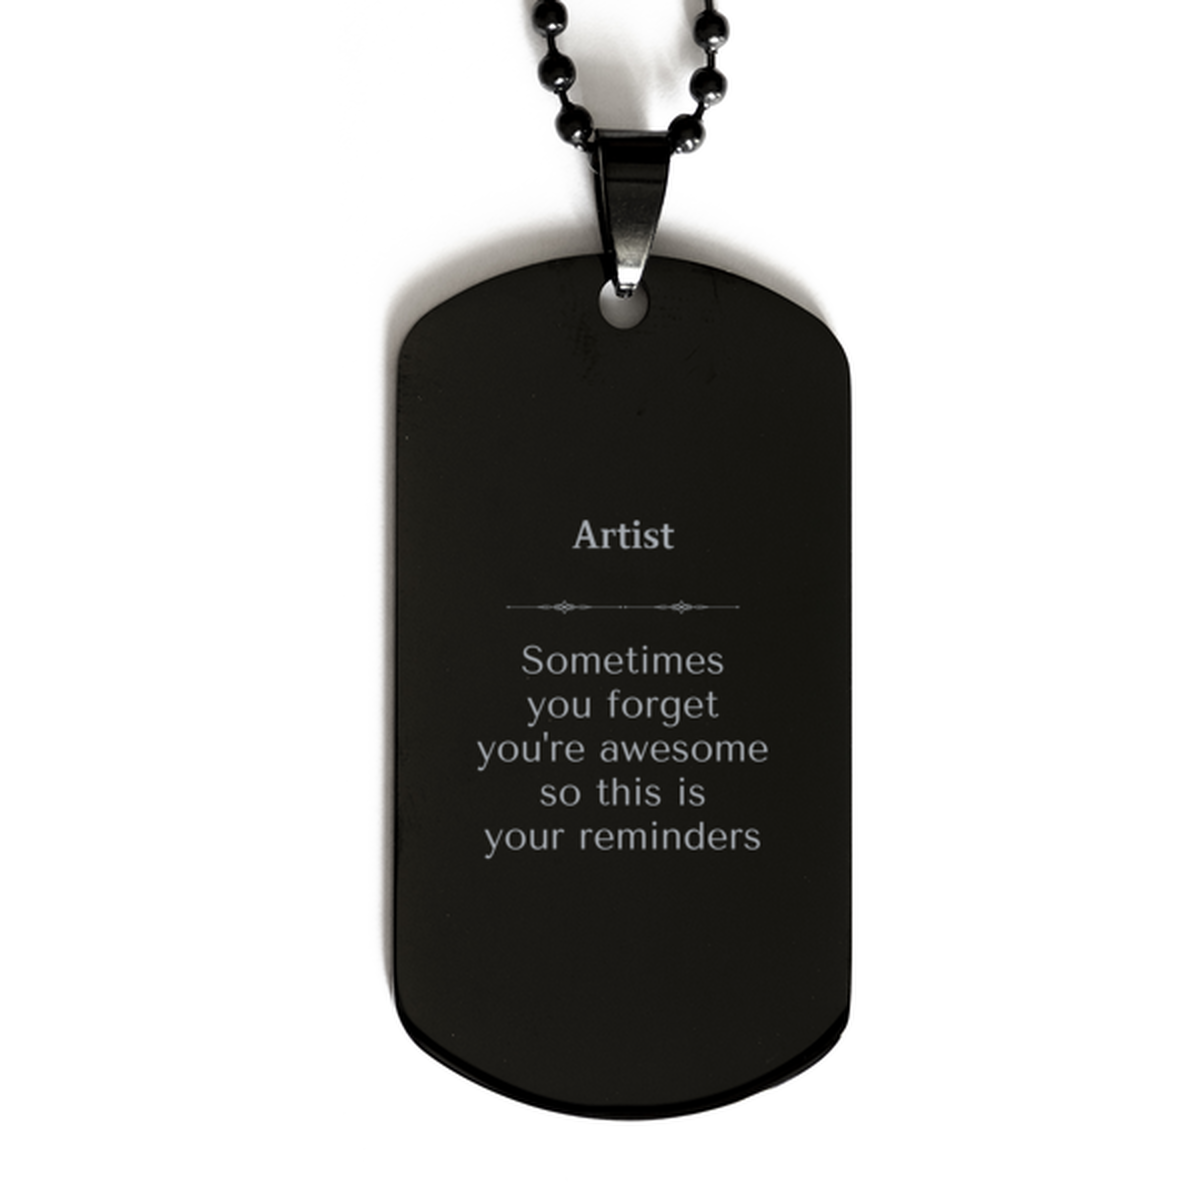 Sentimental Artist Black Dog Tag, Artist Sometimes you forget you're awesome so this is your reminders, Graduation Christmas Birthday Gifts for Artist, Men, Women, Coworkers